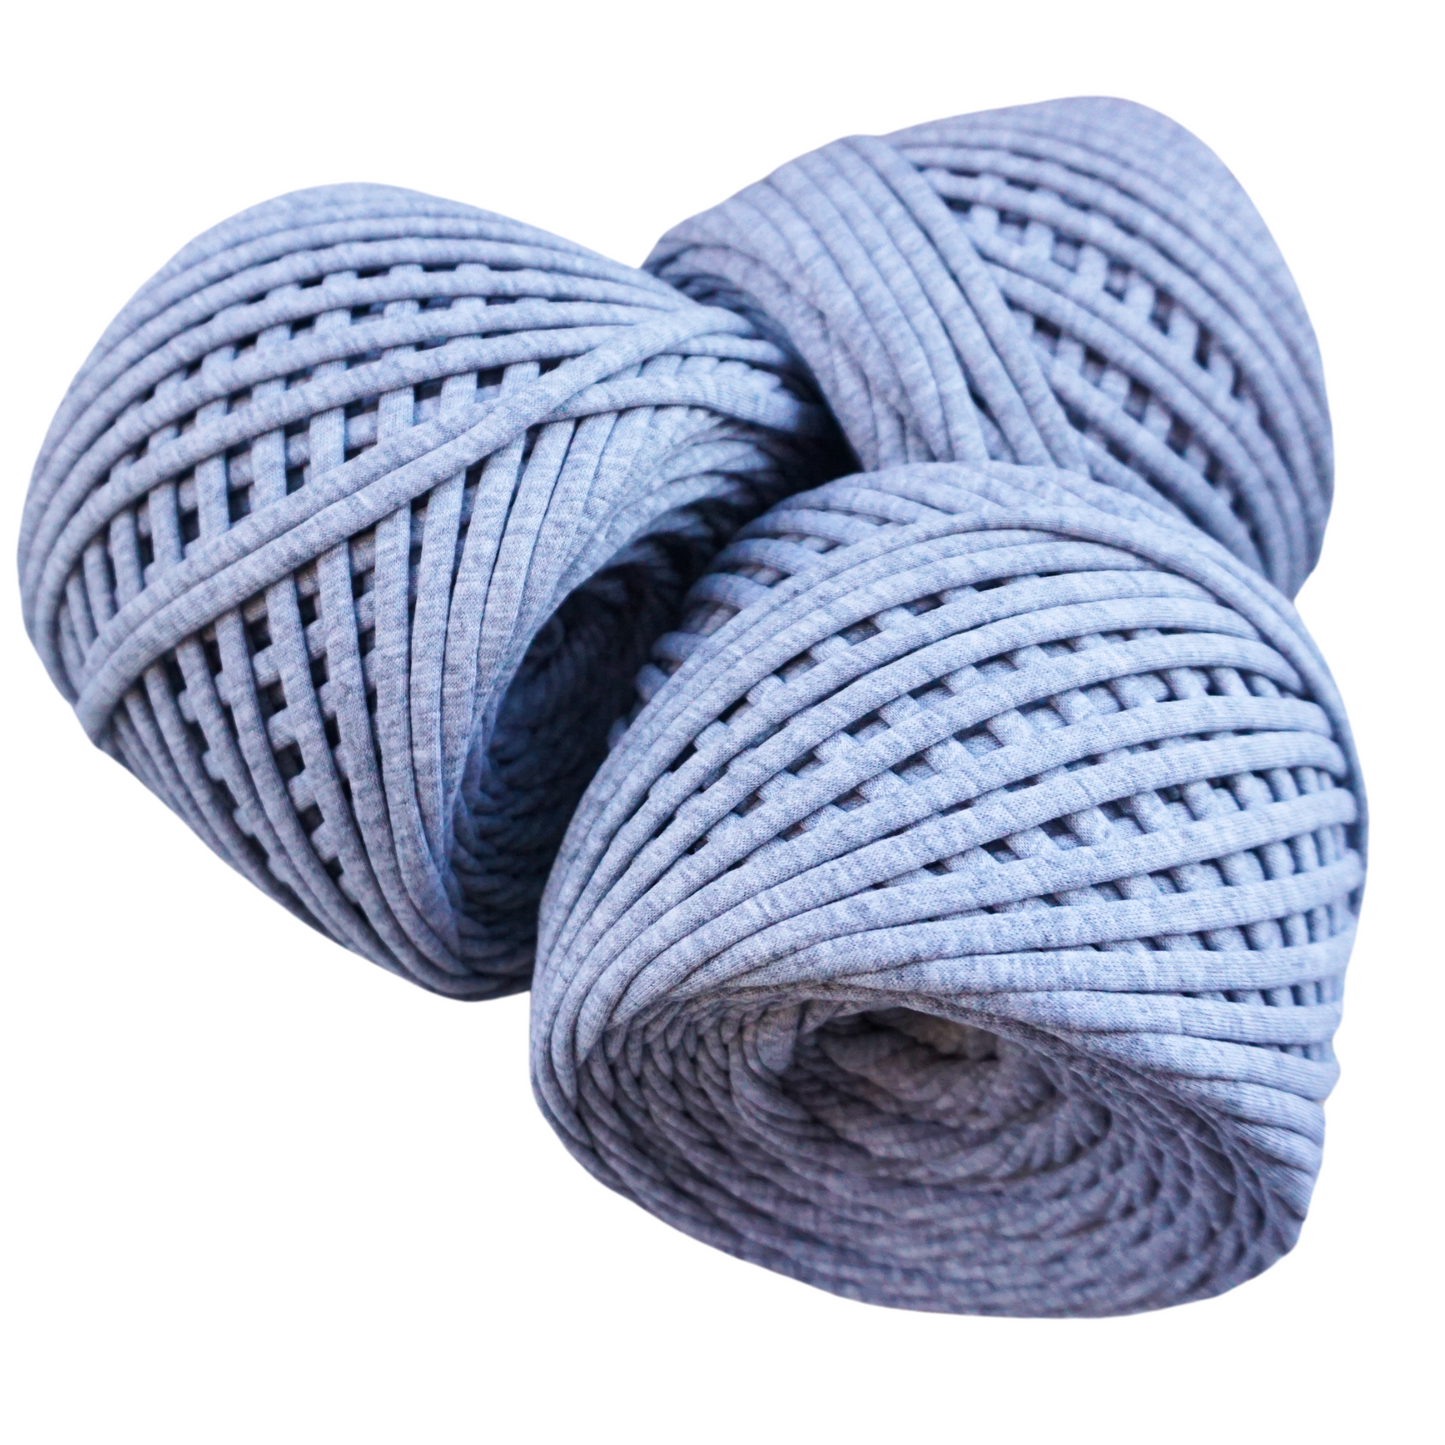 T-shirt yarn for crocheting baskets, bags, rugs and home decor. Jersey grey